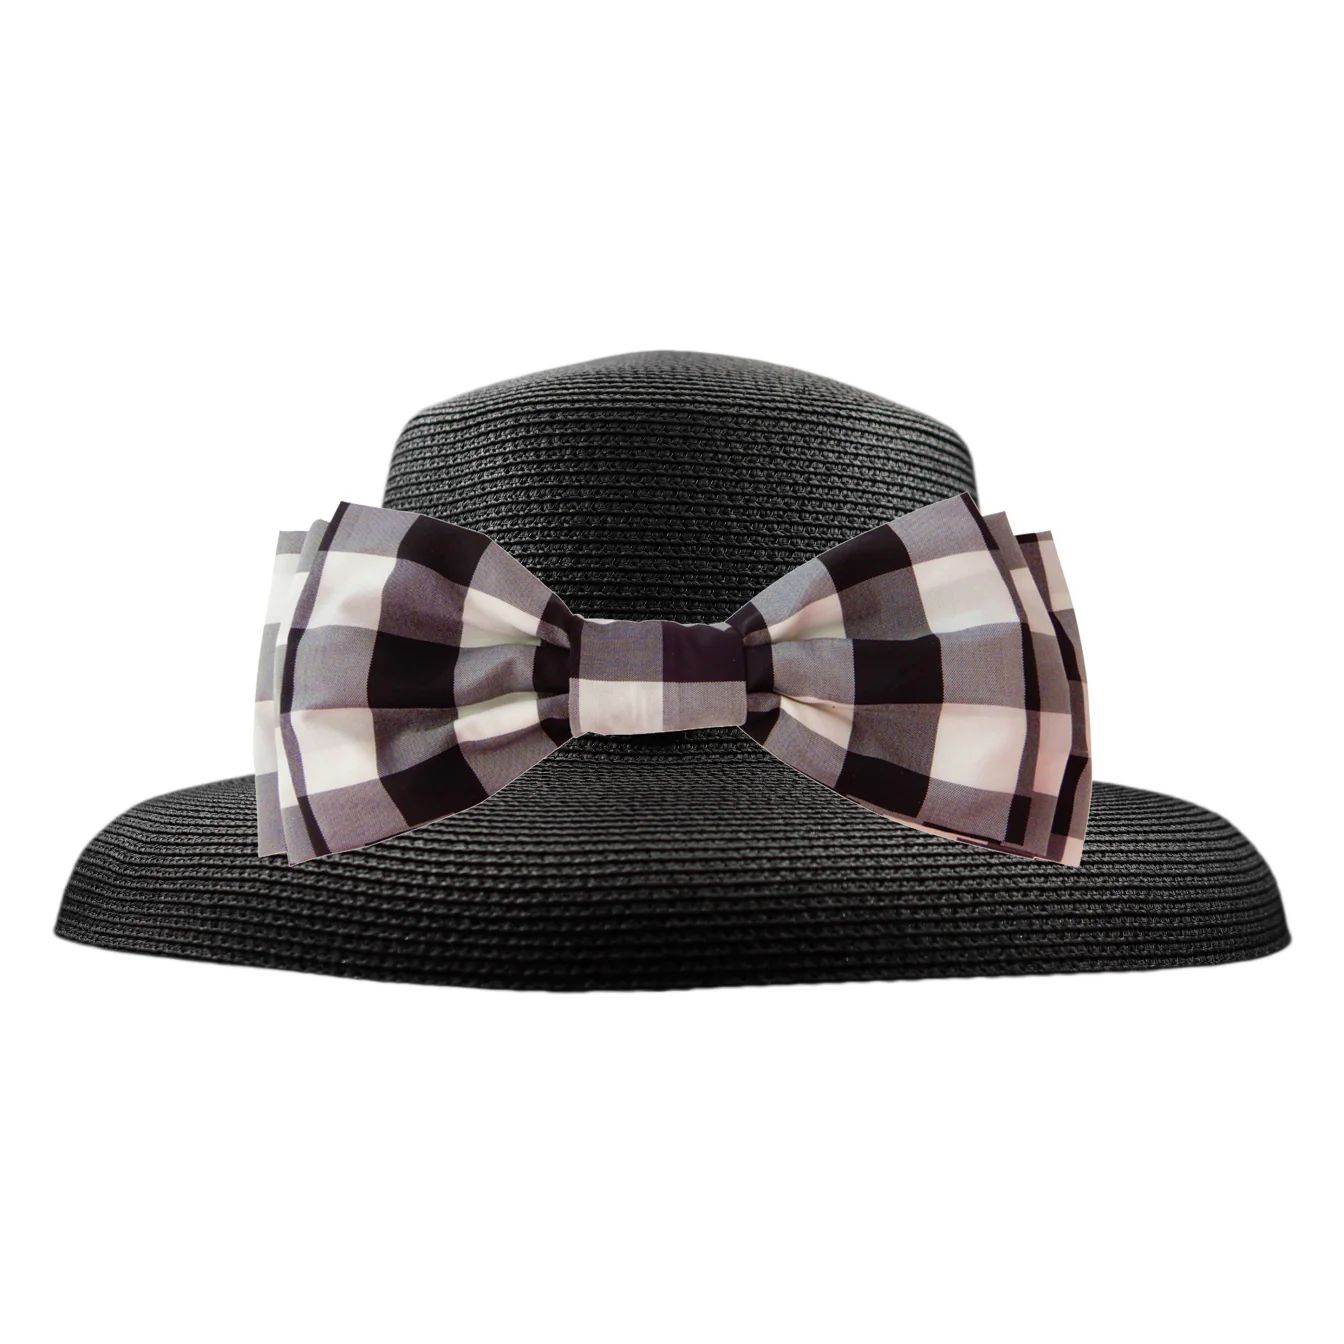 Hepburn Hat with Grande Brim with Interchangeable Bows & Flowers | Dress For Cocktails